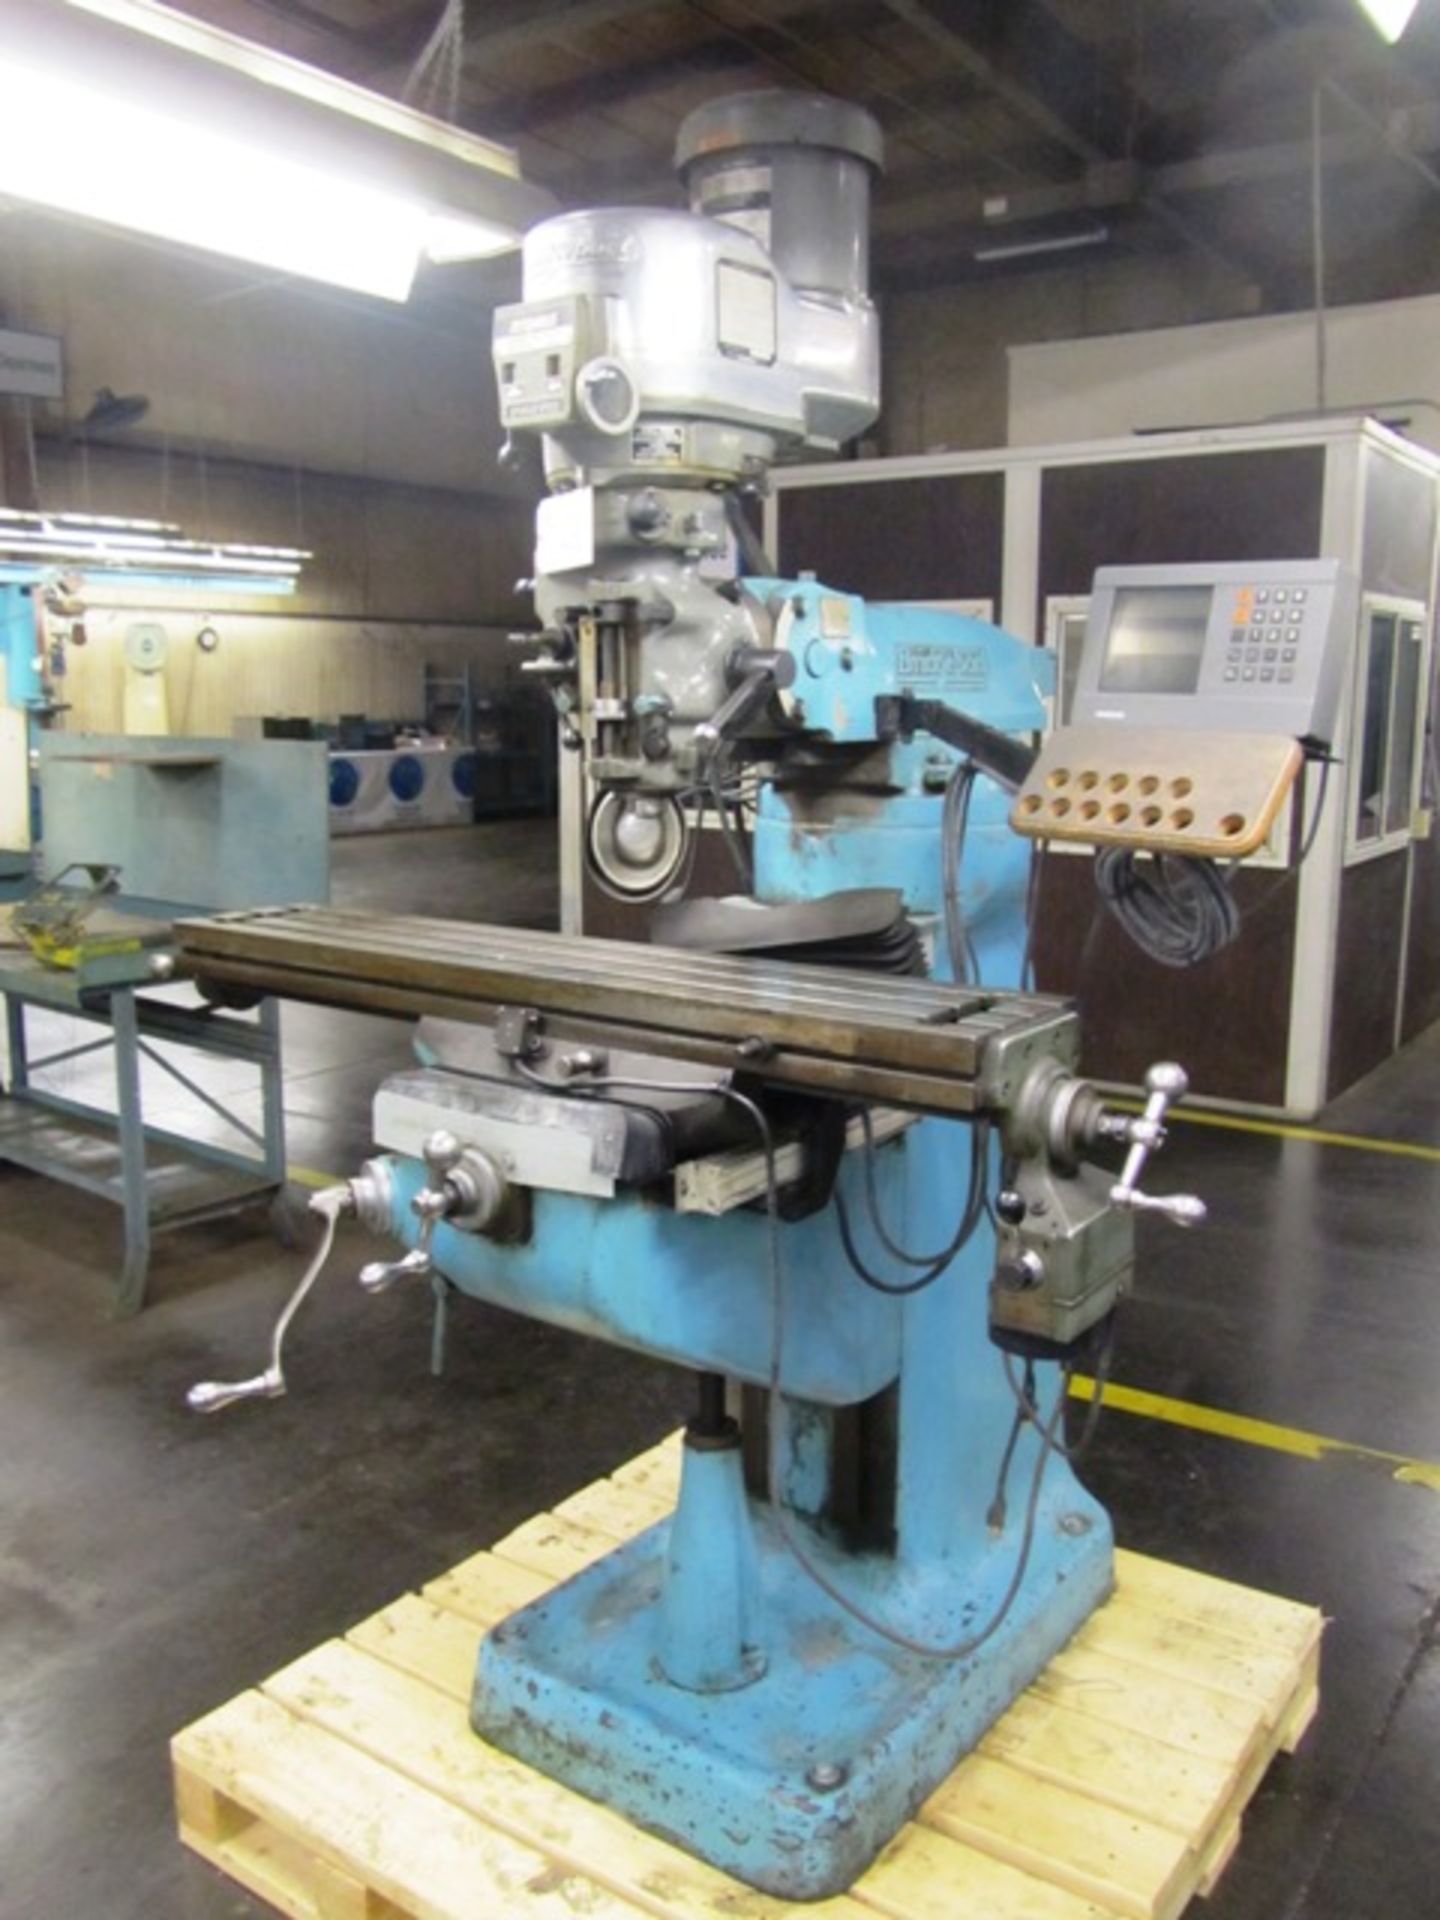 Bridgeport Vertical Milling Machine with 9'' x 48'' Power Feed Table, R8 Taper, Spindle Speeds to